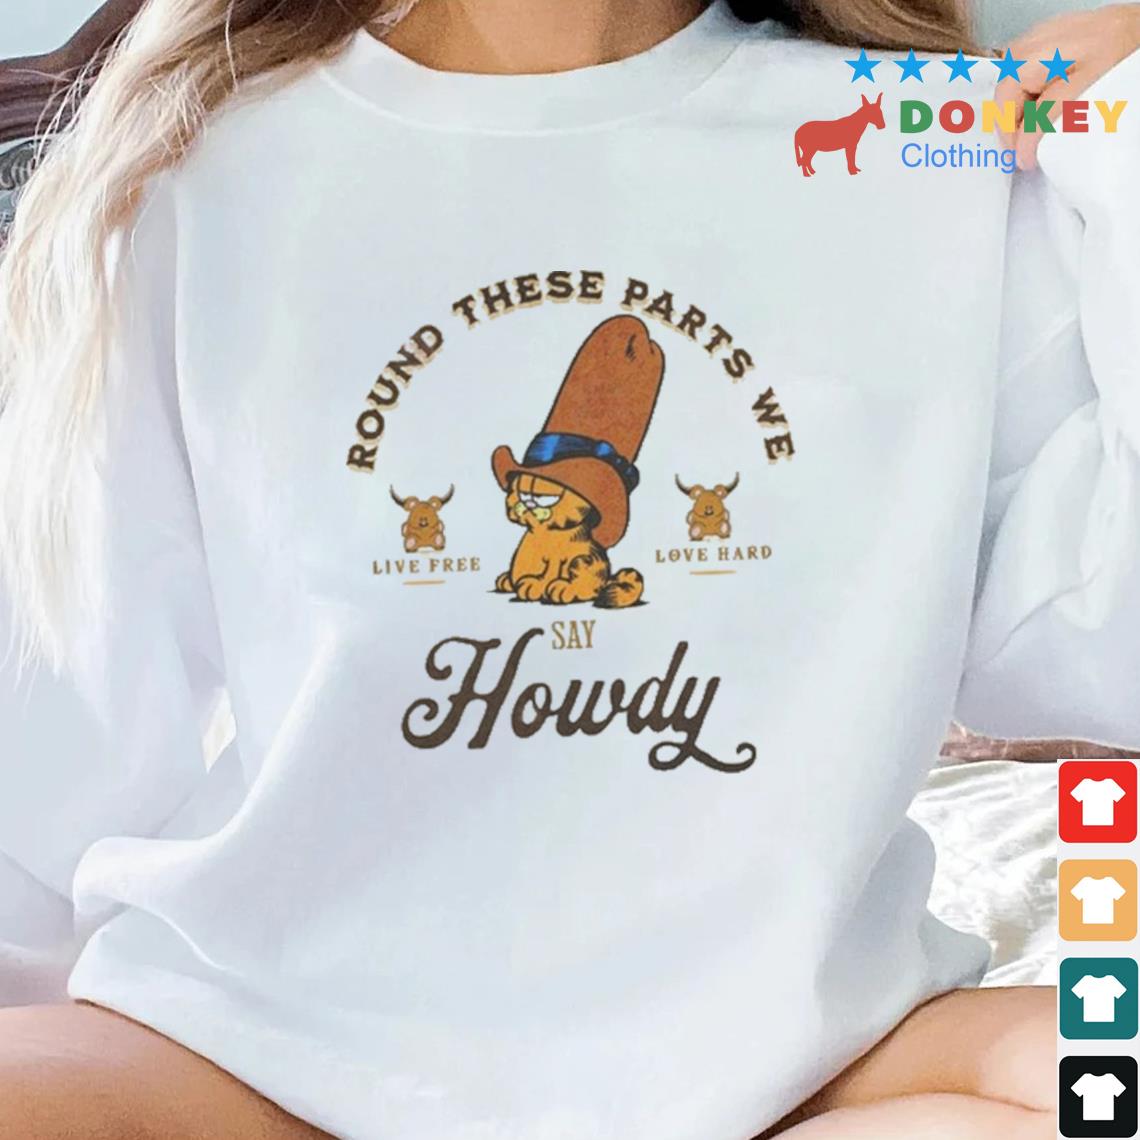 Garfield Howdy Round These Parts We Howdy Shirt